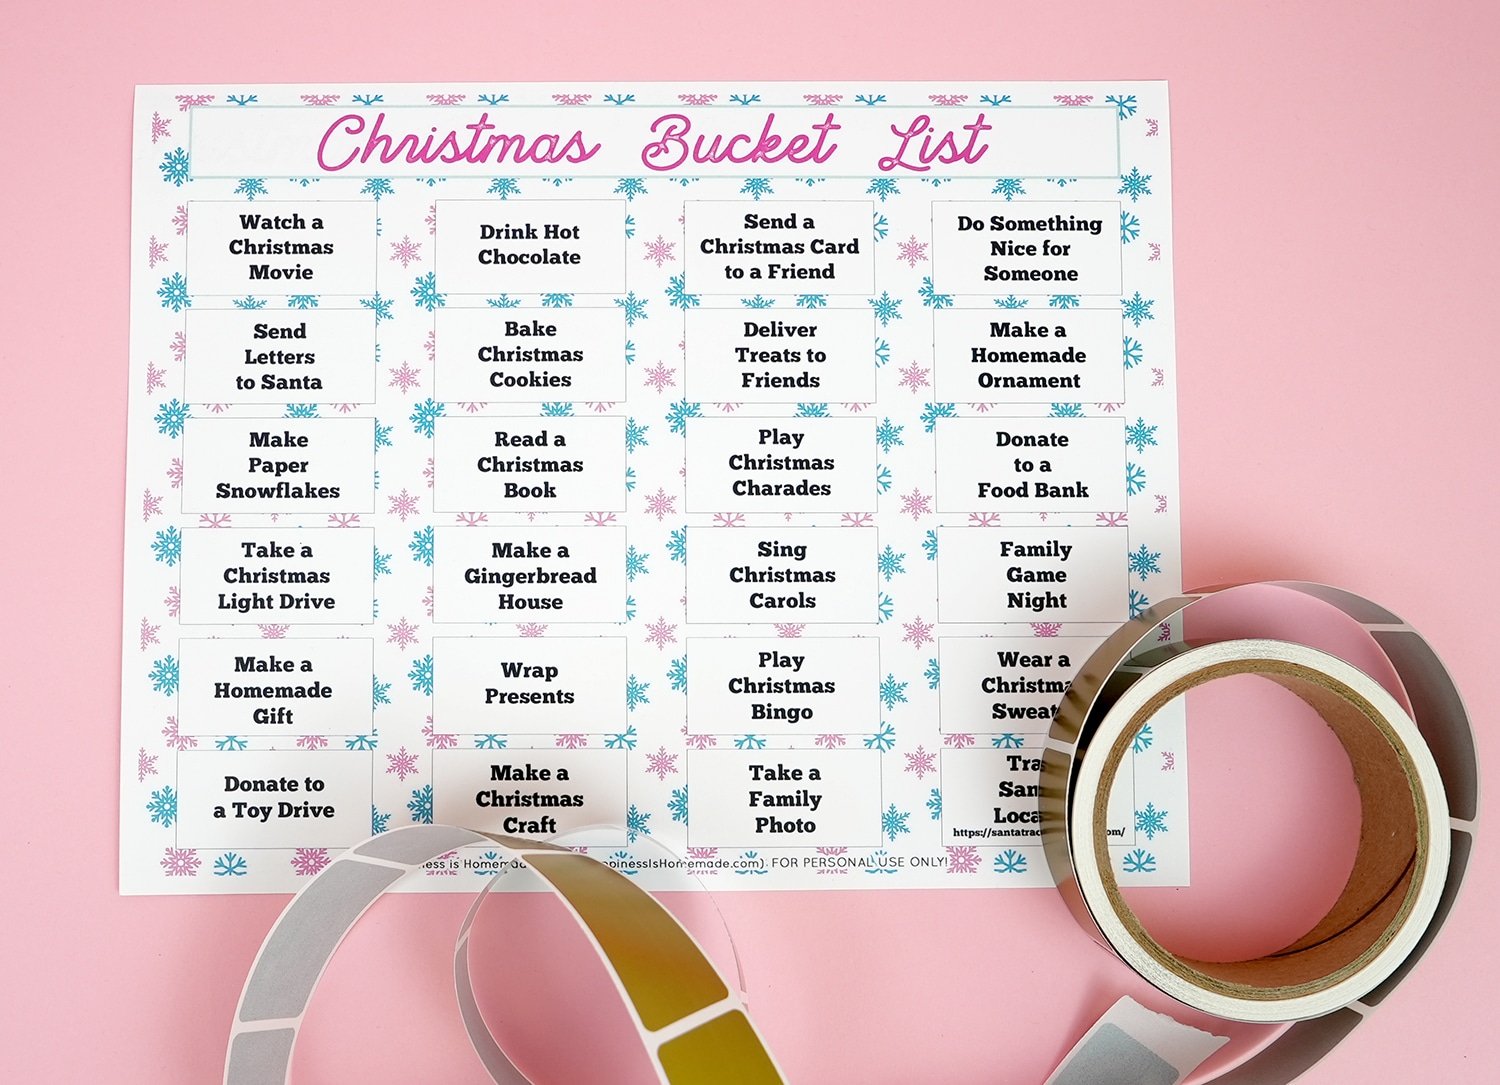 Christmas Bucket List printable on a pink background with roll of gold scratch-off labels